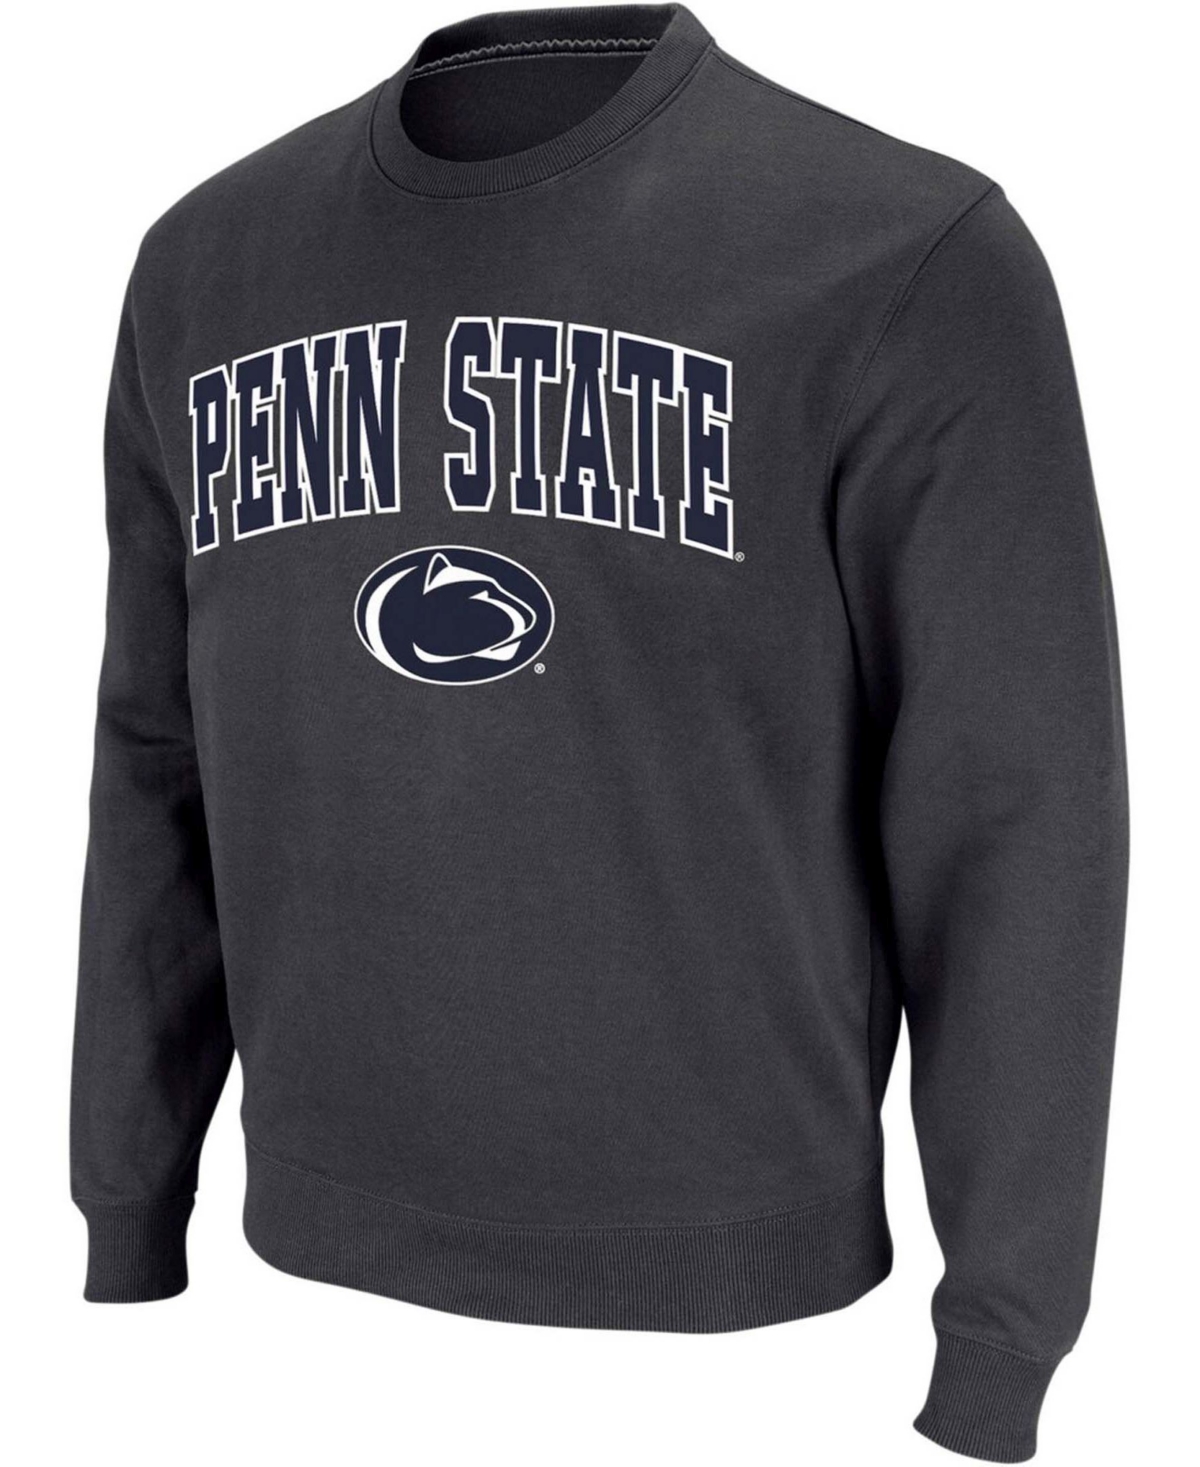 Colosseum Men's Charcoal Penn State Nittany Lions Arch Logo Crew Neck Sweatshirt